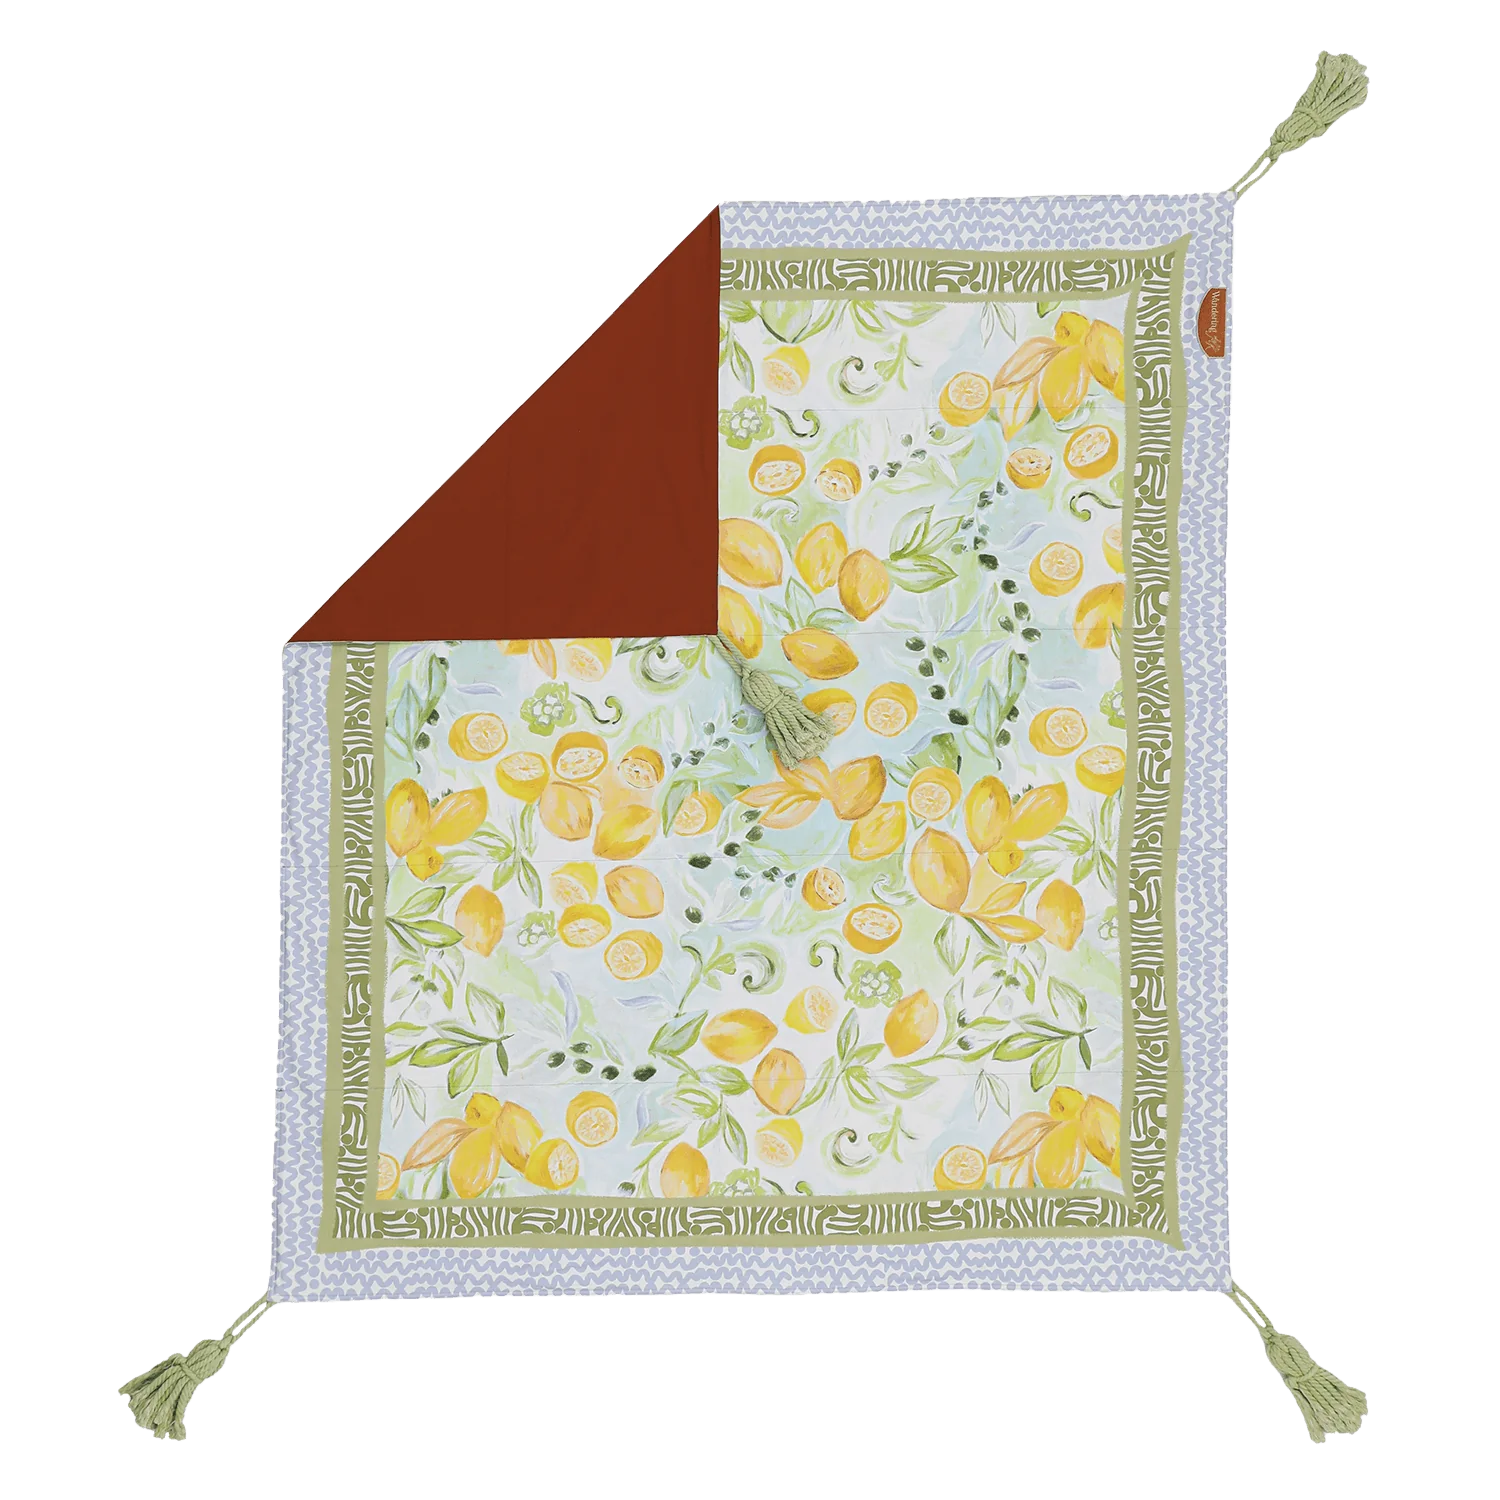 The Le Lemon Picnic Rug features a hand drawn design imbued with the memory of balmy late summer nights on the Amalfi coastline.